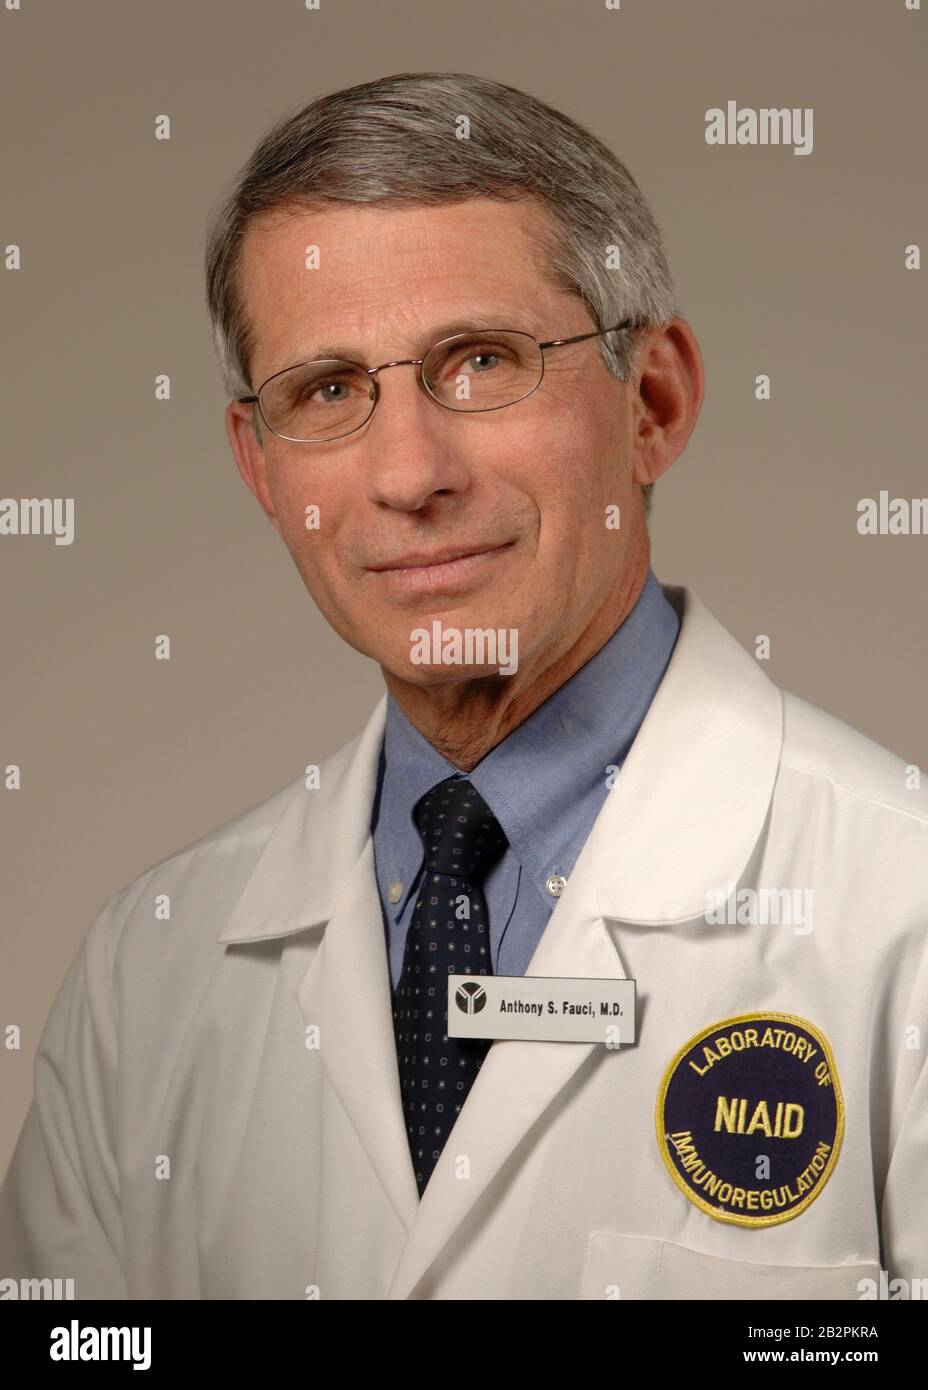 Dr. Anthony S. Fauci, M.D., Director of NIAID, National Institute of Allergy and Infectious Diseases, since 1984. He oversees an extensive research portfolio of basic and applied research to prevent, diagnose, and treat established infectious diseases such as HIV/AIDS, respiratory infections, diarrheal diseases, tuberculosis and malaria as well as emerging diseases such as Covid-19. Stock Photo